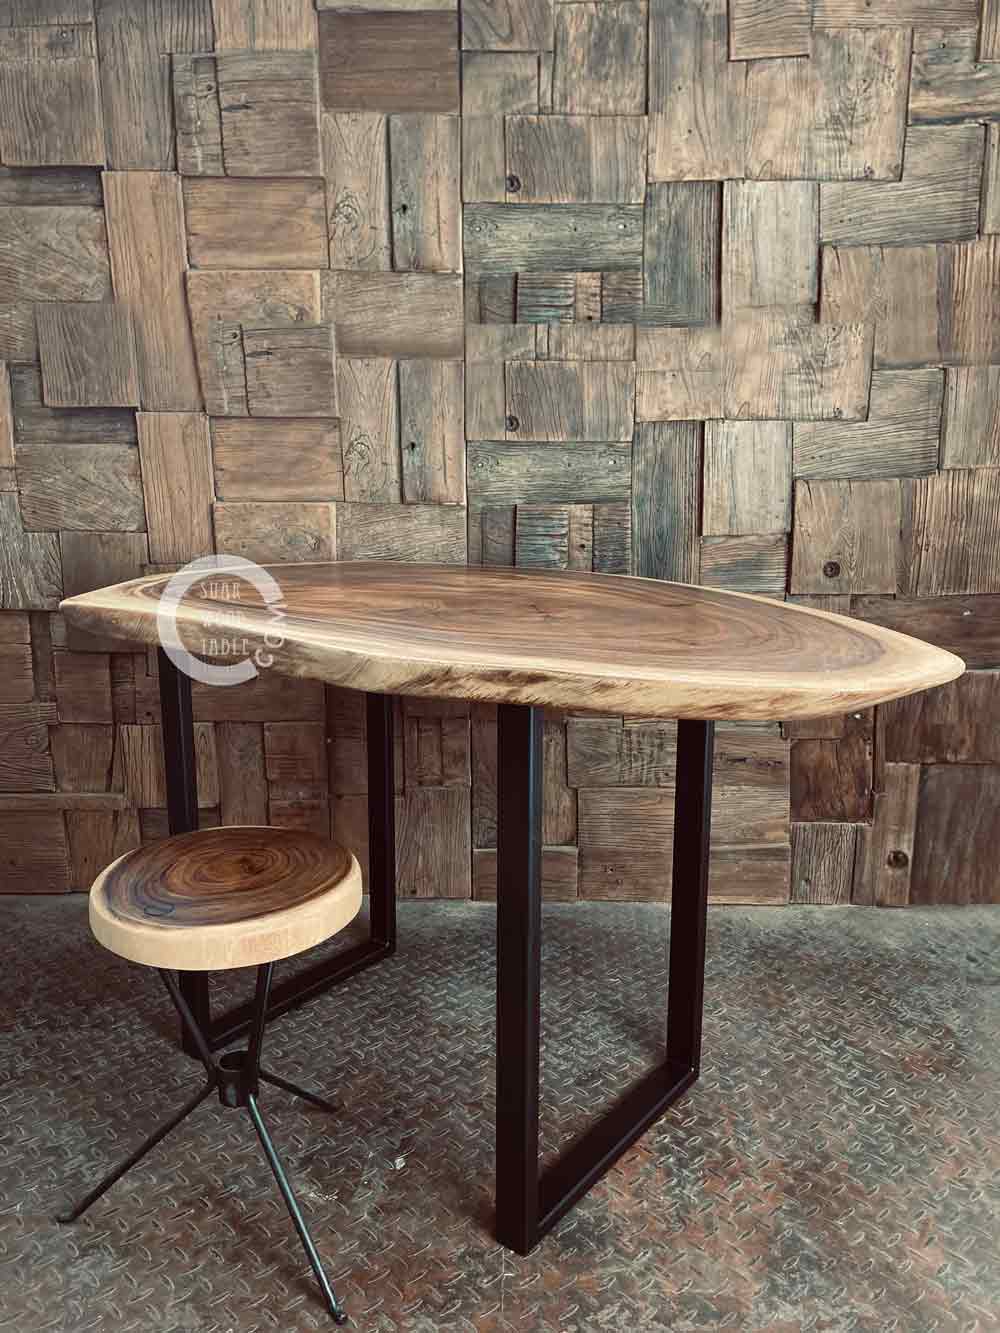 suar wood dining table